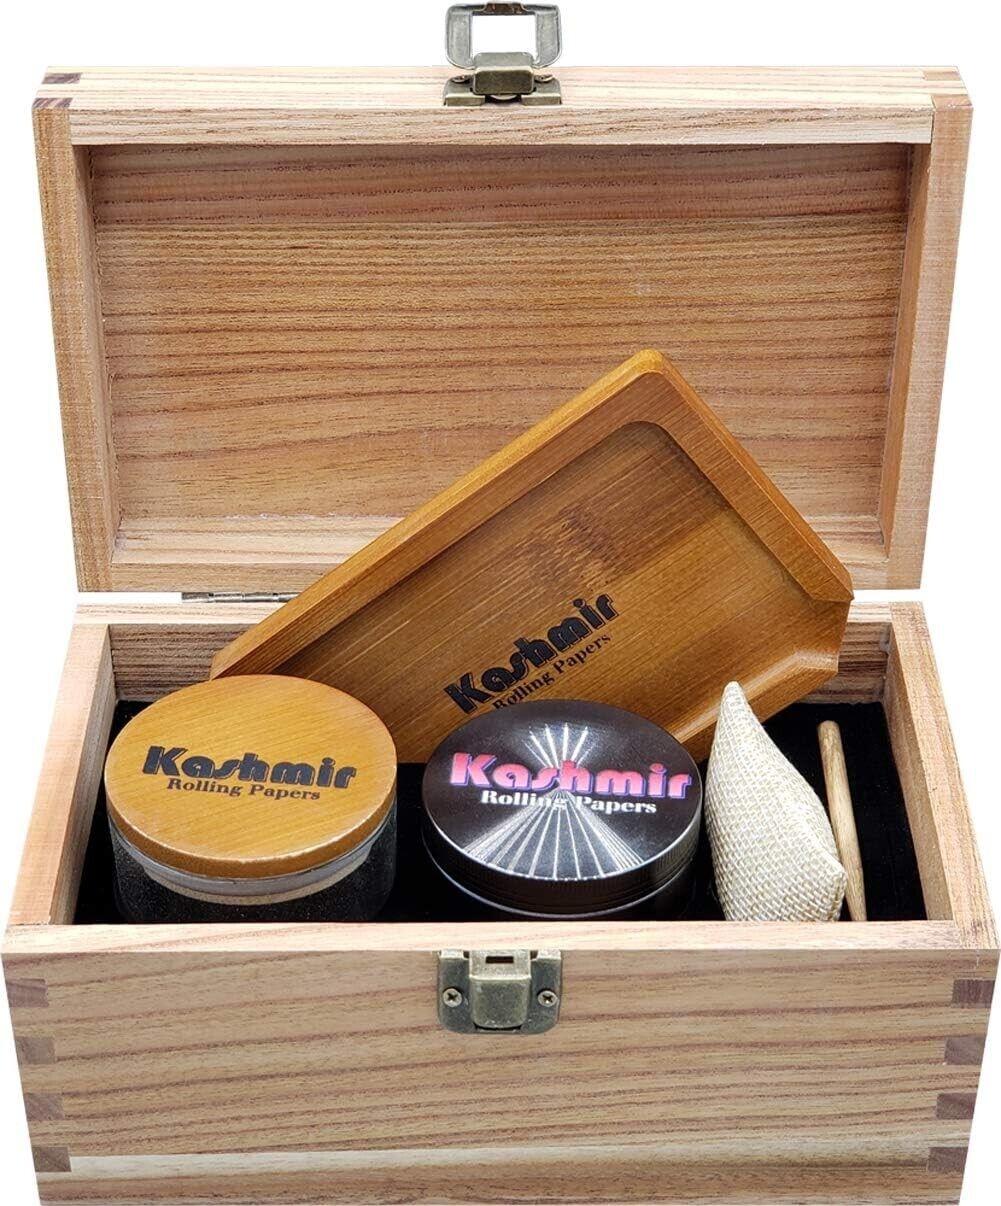 Stash Box with Accessories Durable Cherry Wood Stash Box by Kashmir